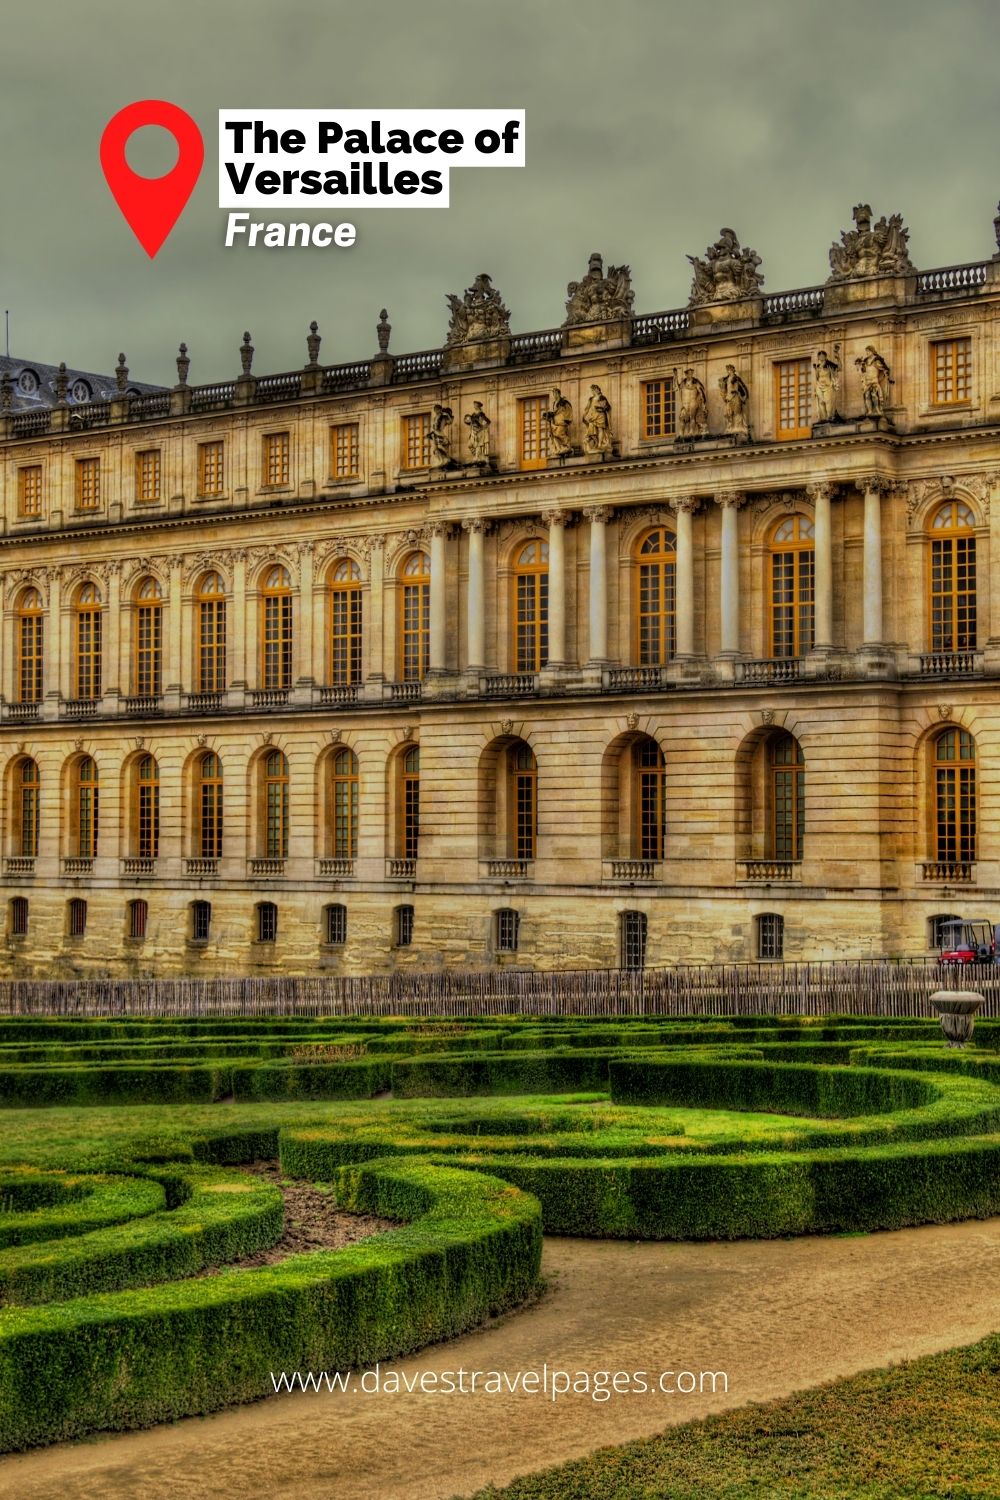 The Palace of Versailles: Famous landmarks in Europe